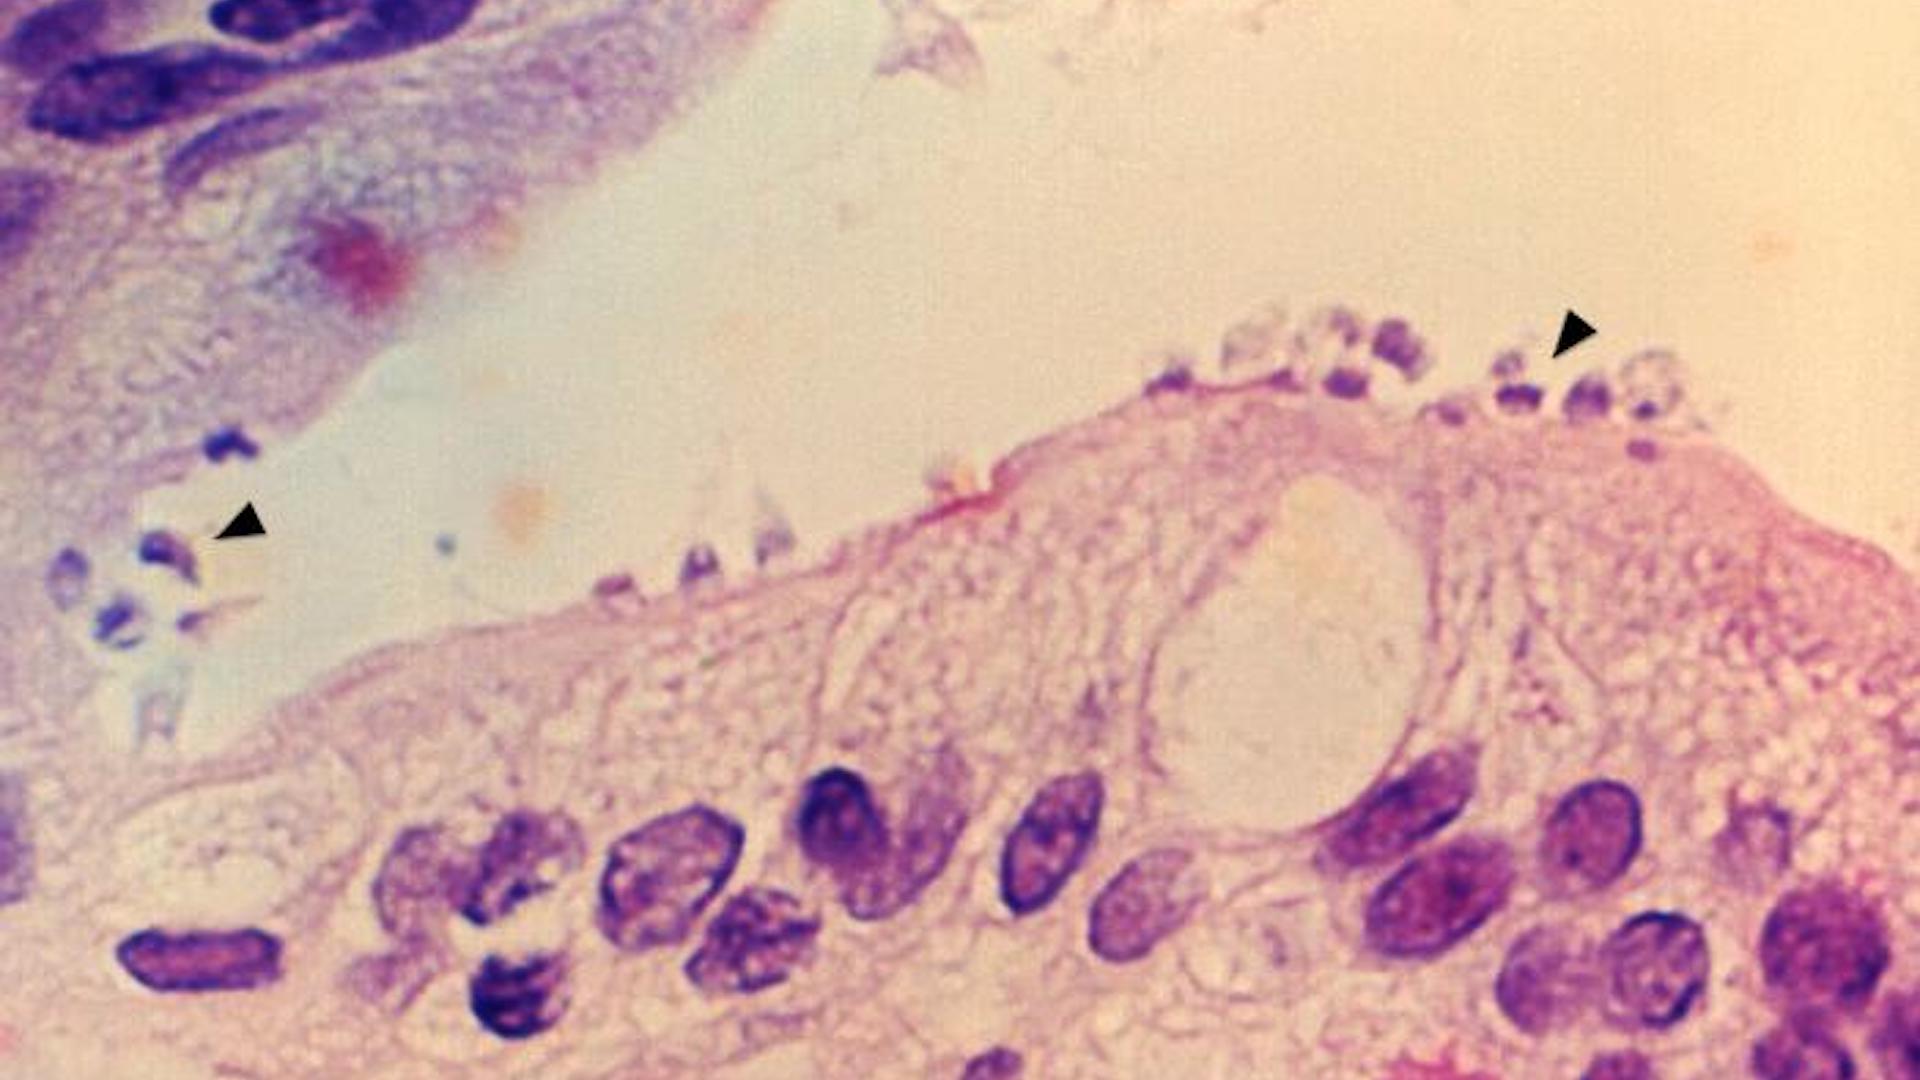 This photomicrograph show small intestine tissues samples in a case of the parasitic disease cryptosporidiosis